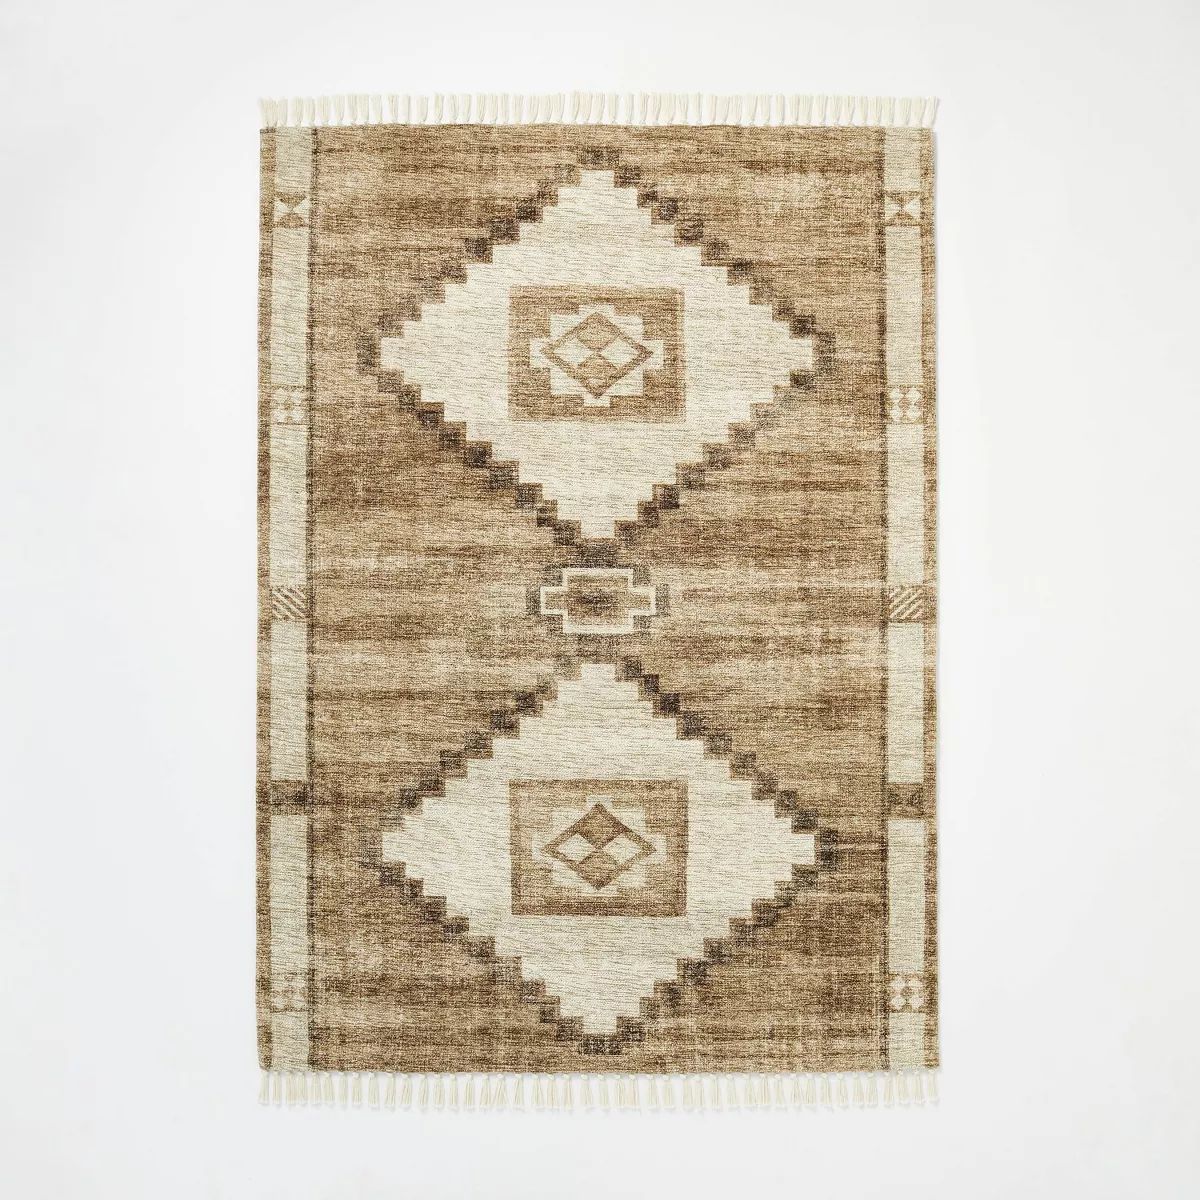 2'4"x7' Double Medallion Persian Style Rug Tan - Threshold™ designed with Studio McGee | Target